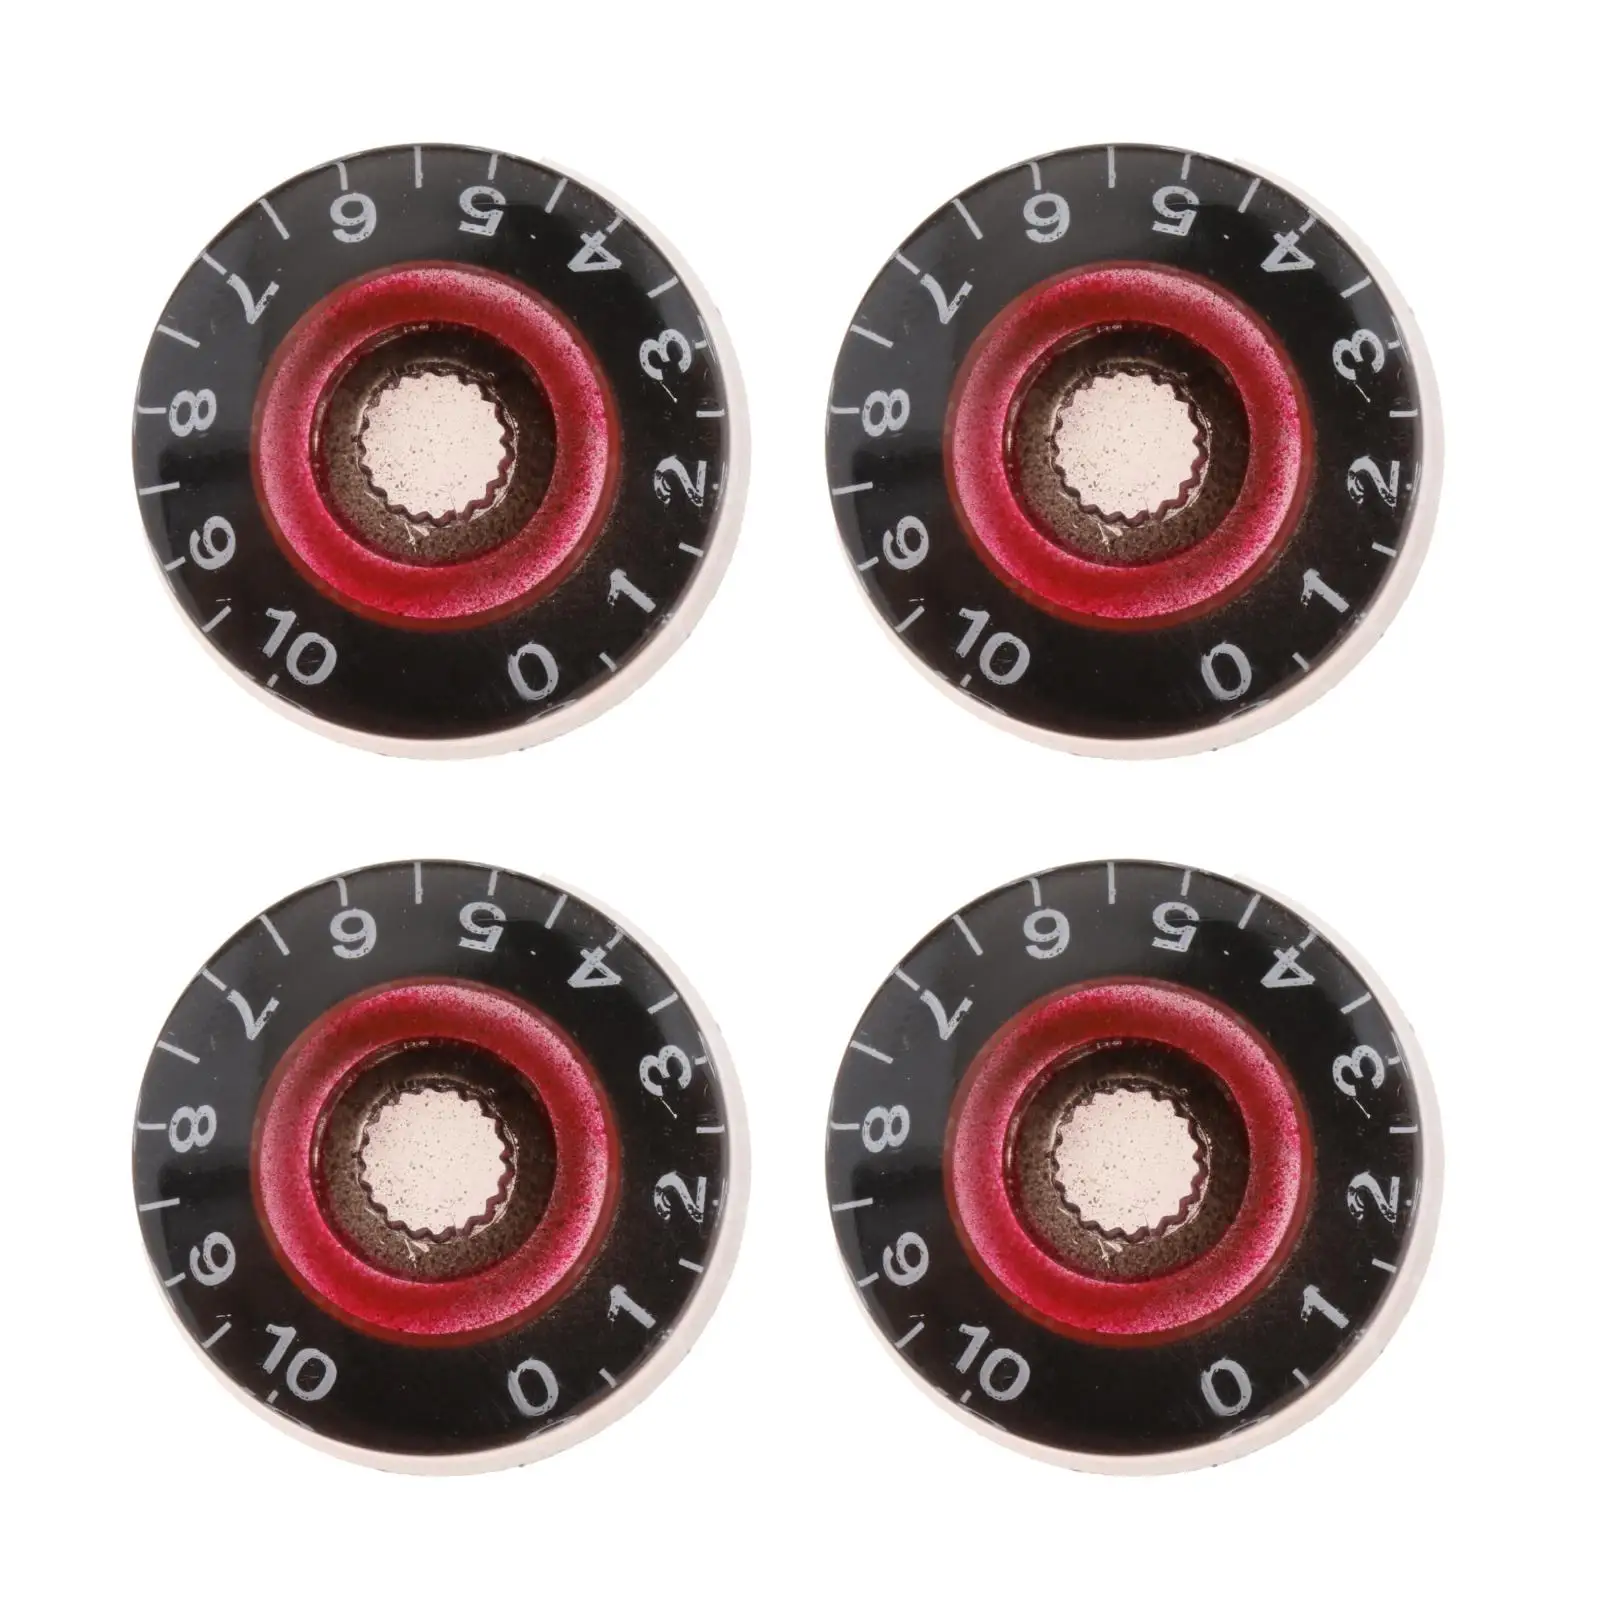 4PCS Electric Guitar Tone and Volume Control Knobs Guitars Replacement Numbers Potentiometer Knobs